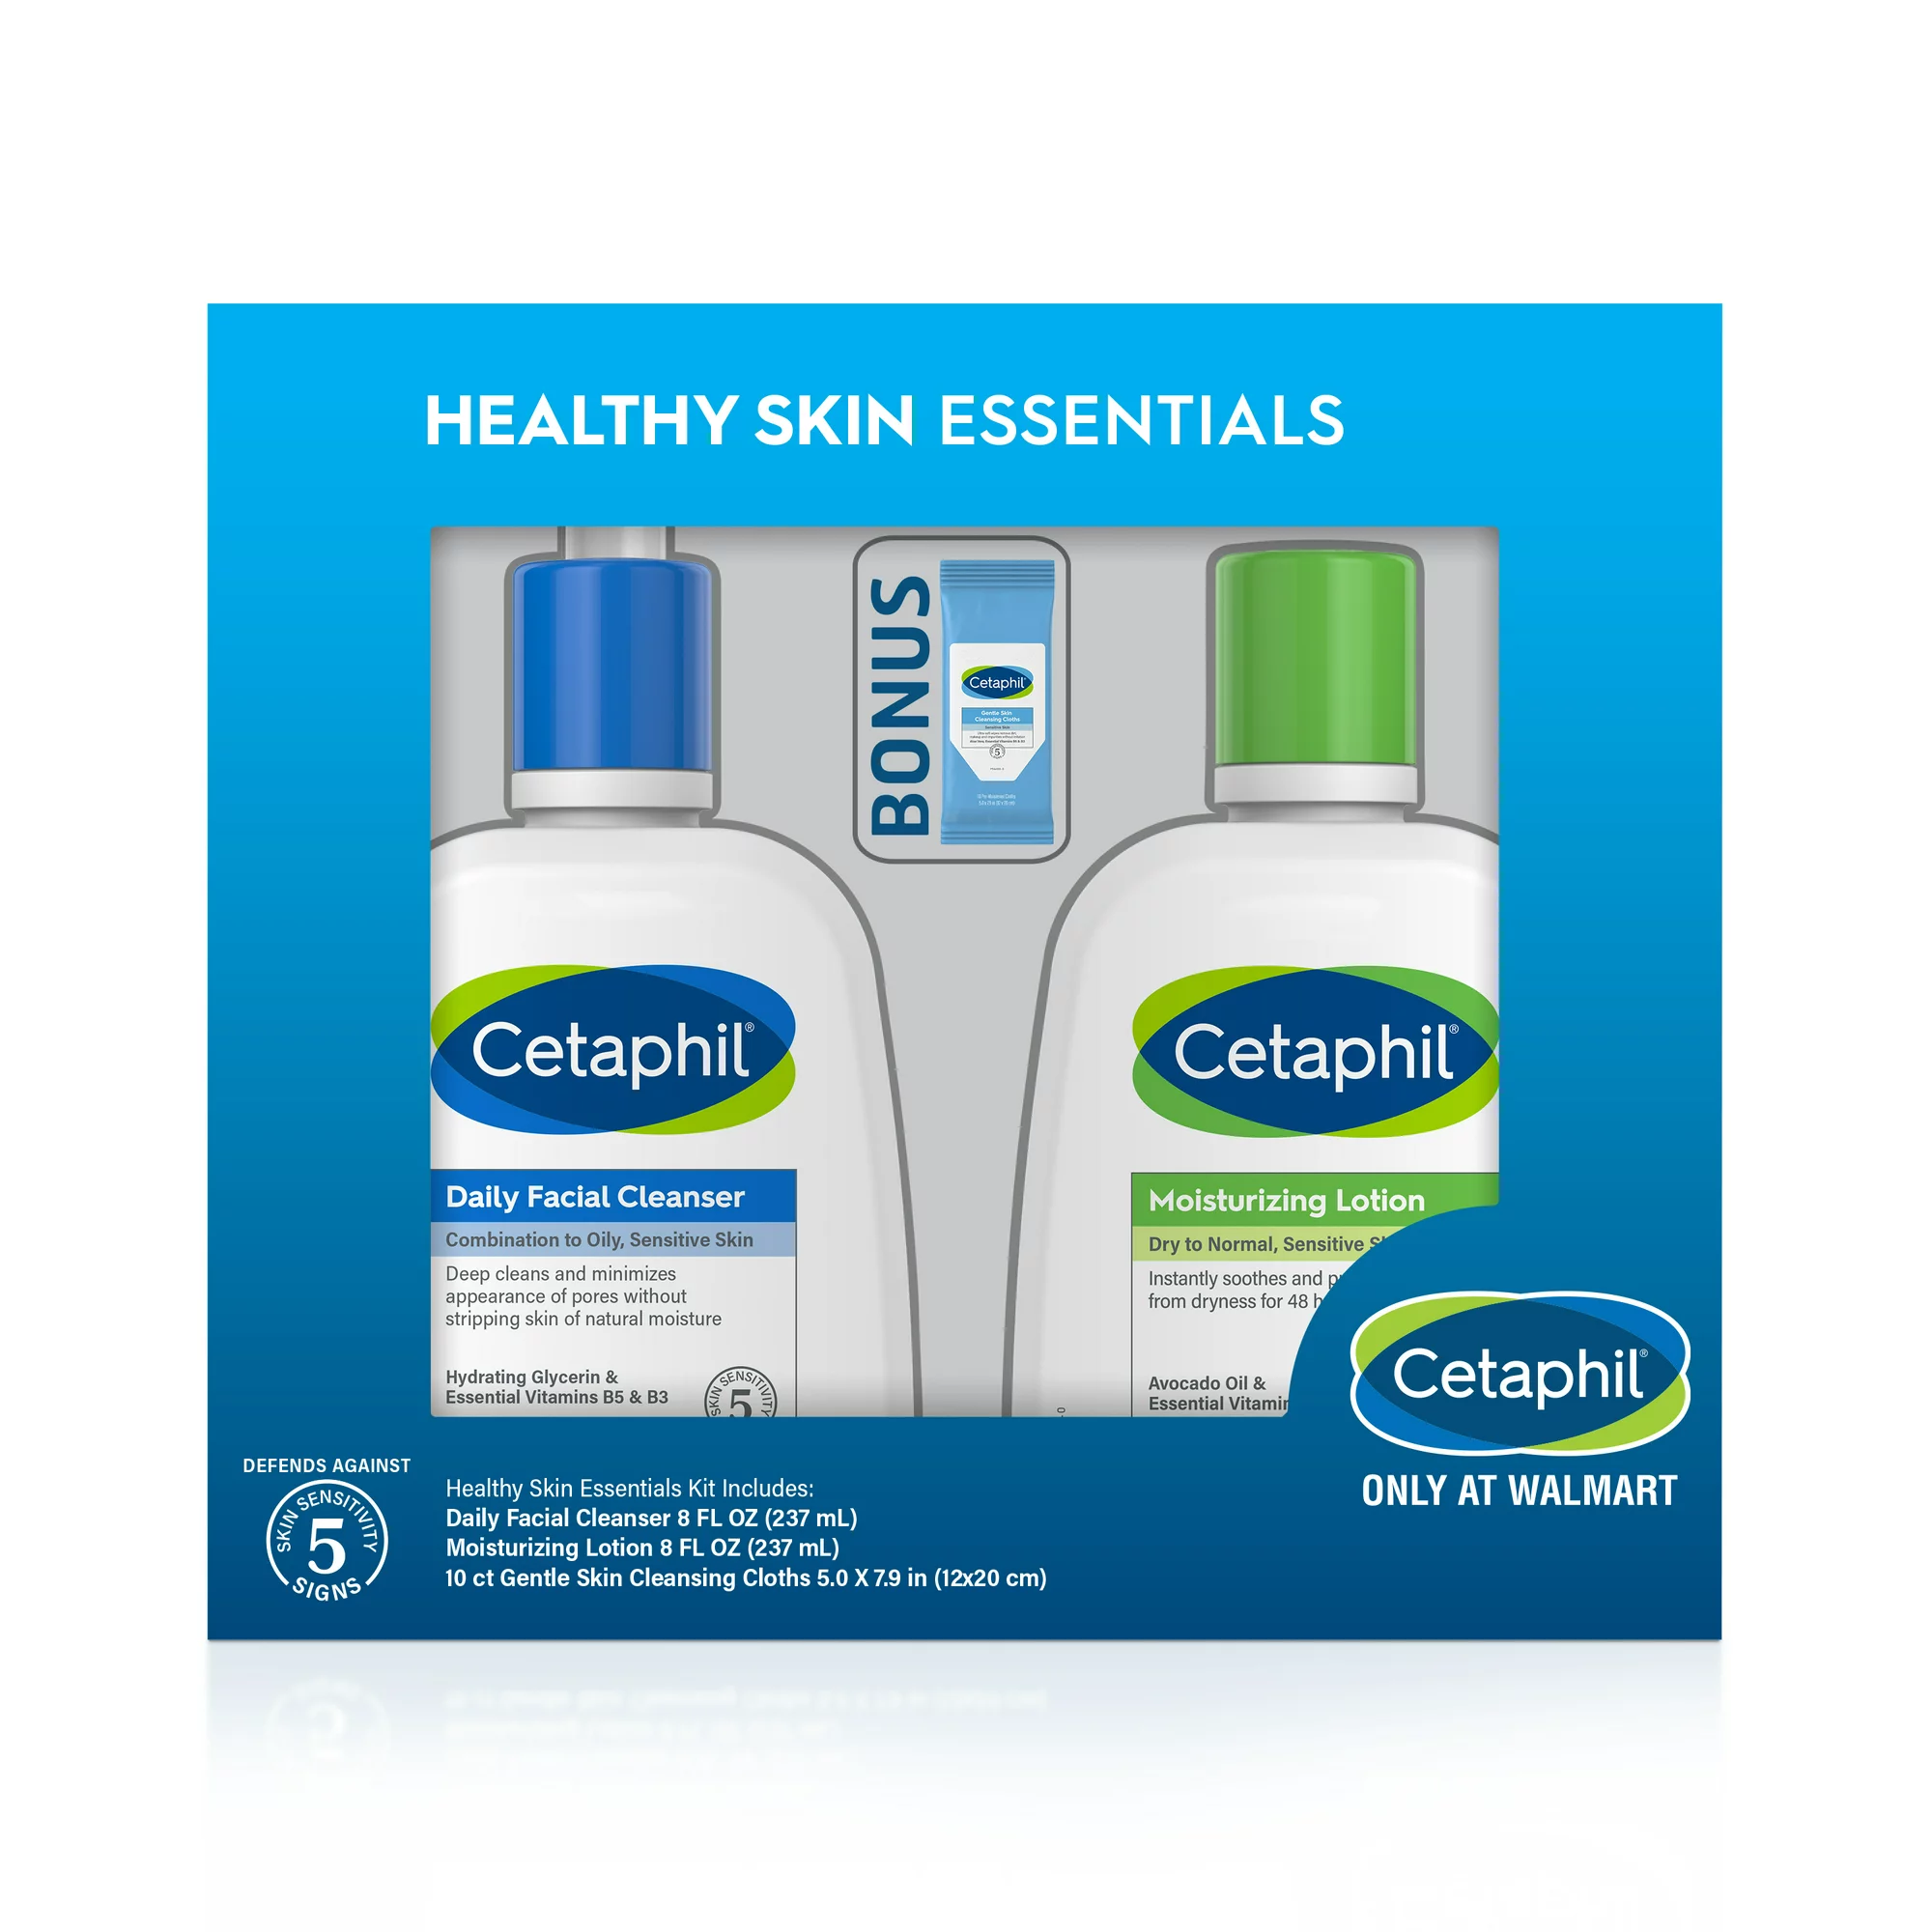 Cetaphil Healthy Skin Essentials Kit, Daily Facial Cleanser, Moisturizing Lotion & Cleansing Cloths - image 1 of 12